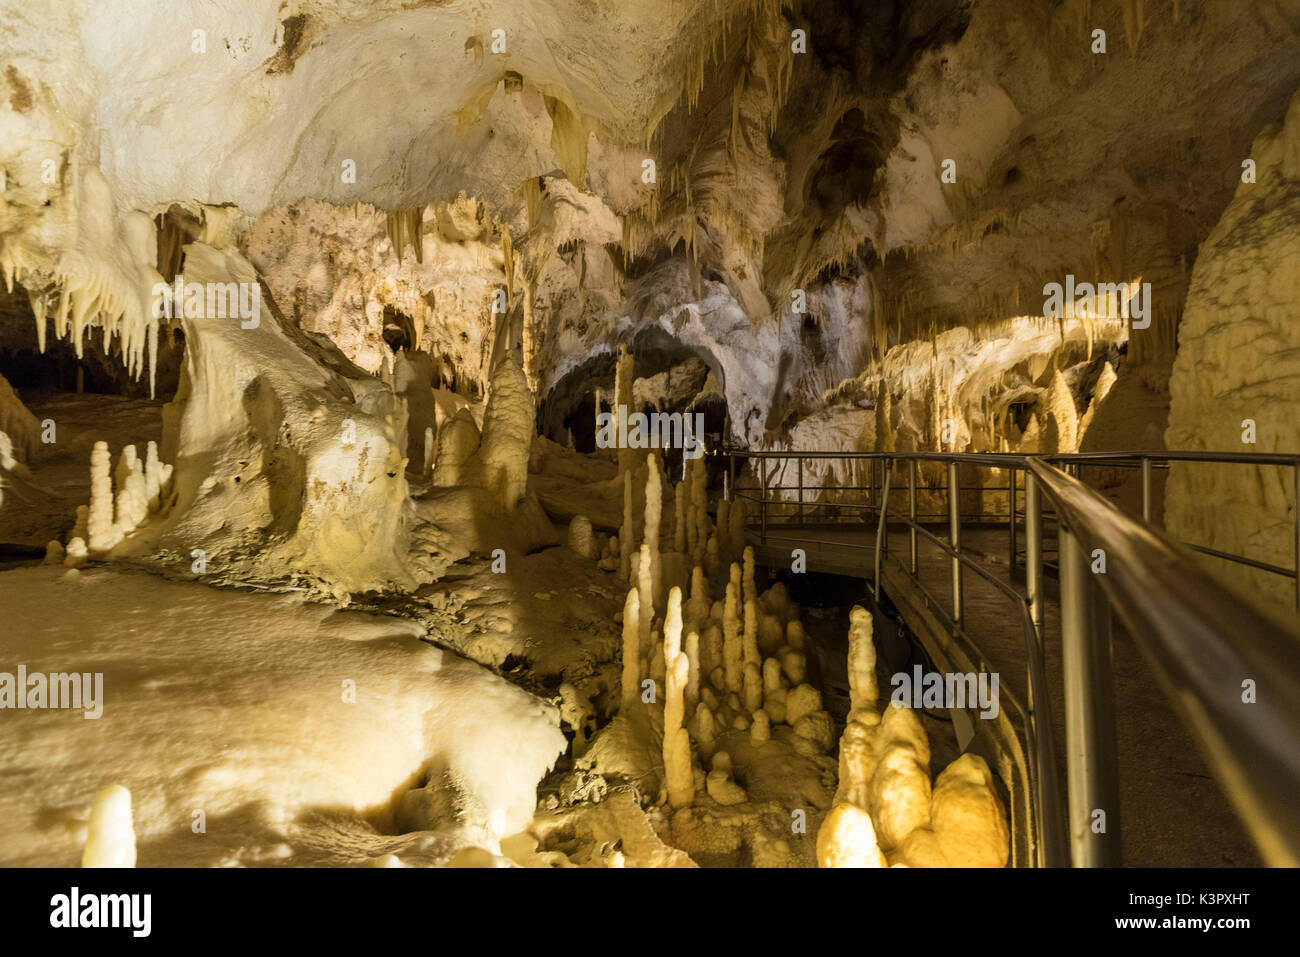 The natural show of Frasassi Caves with sharp stalactites and stalagmites Genga Province of Ancona Marche Italy Europe Stock Photo